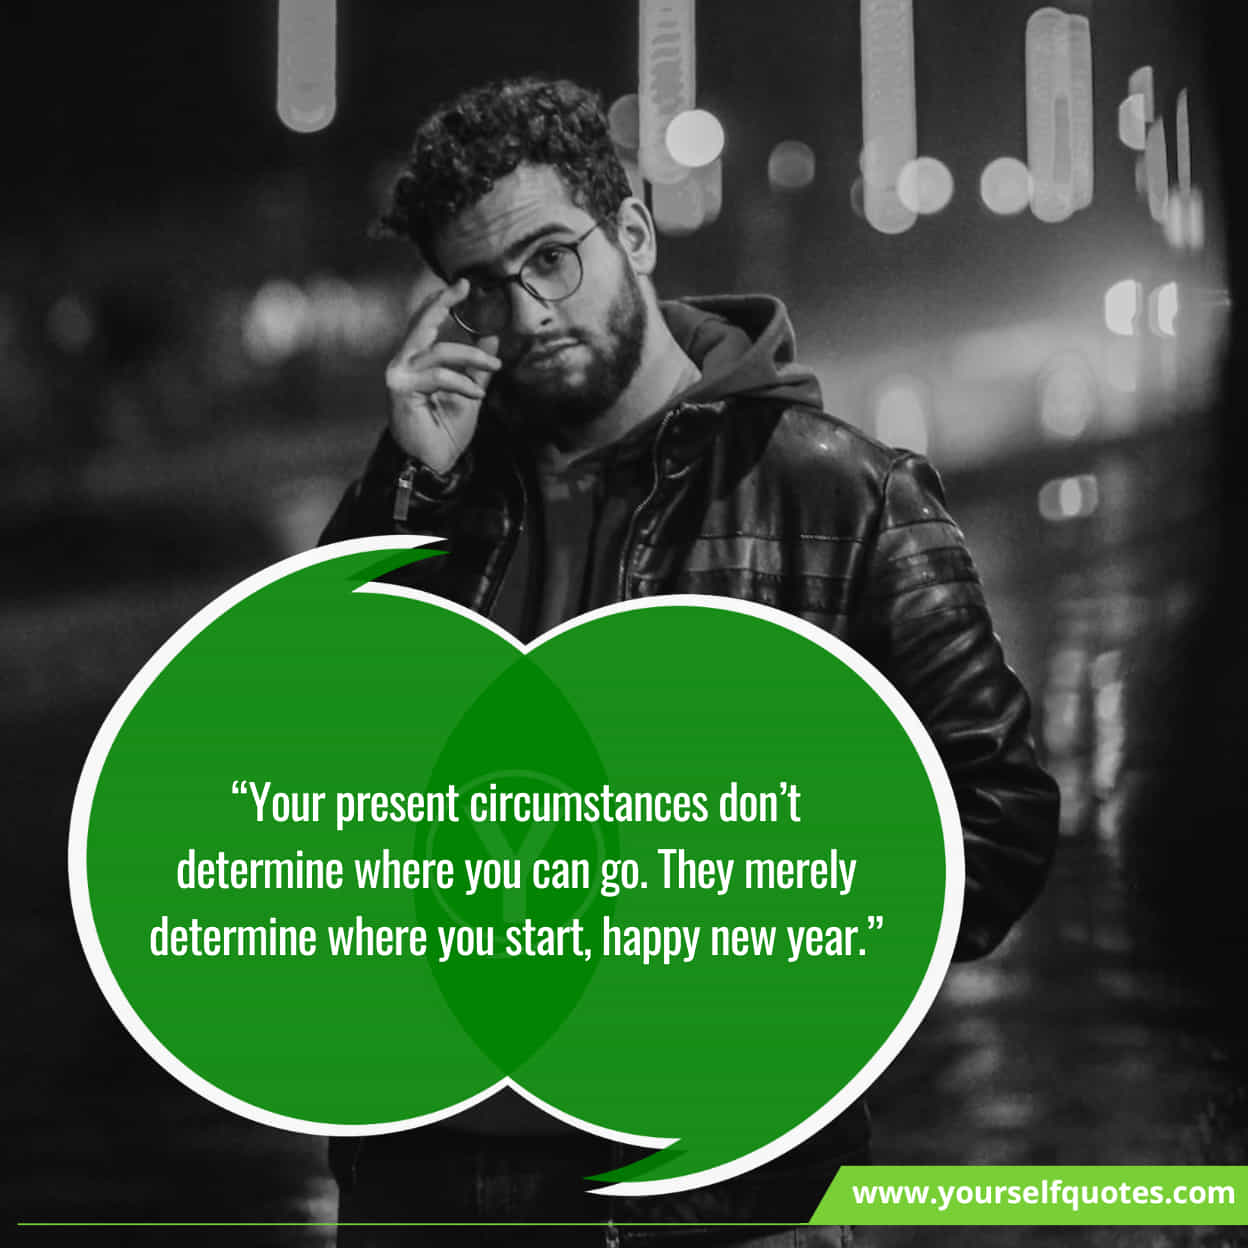 Best Inspirational Quotes On New Year Celebration